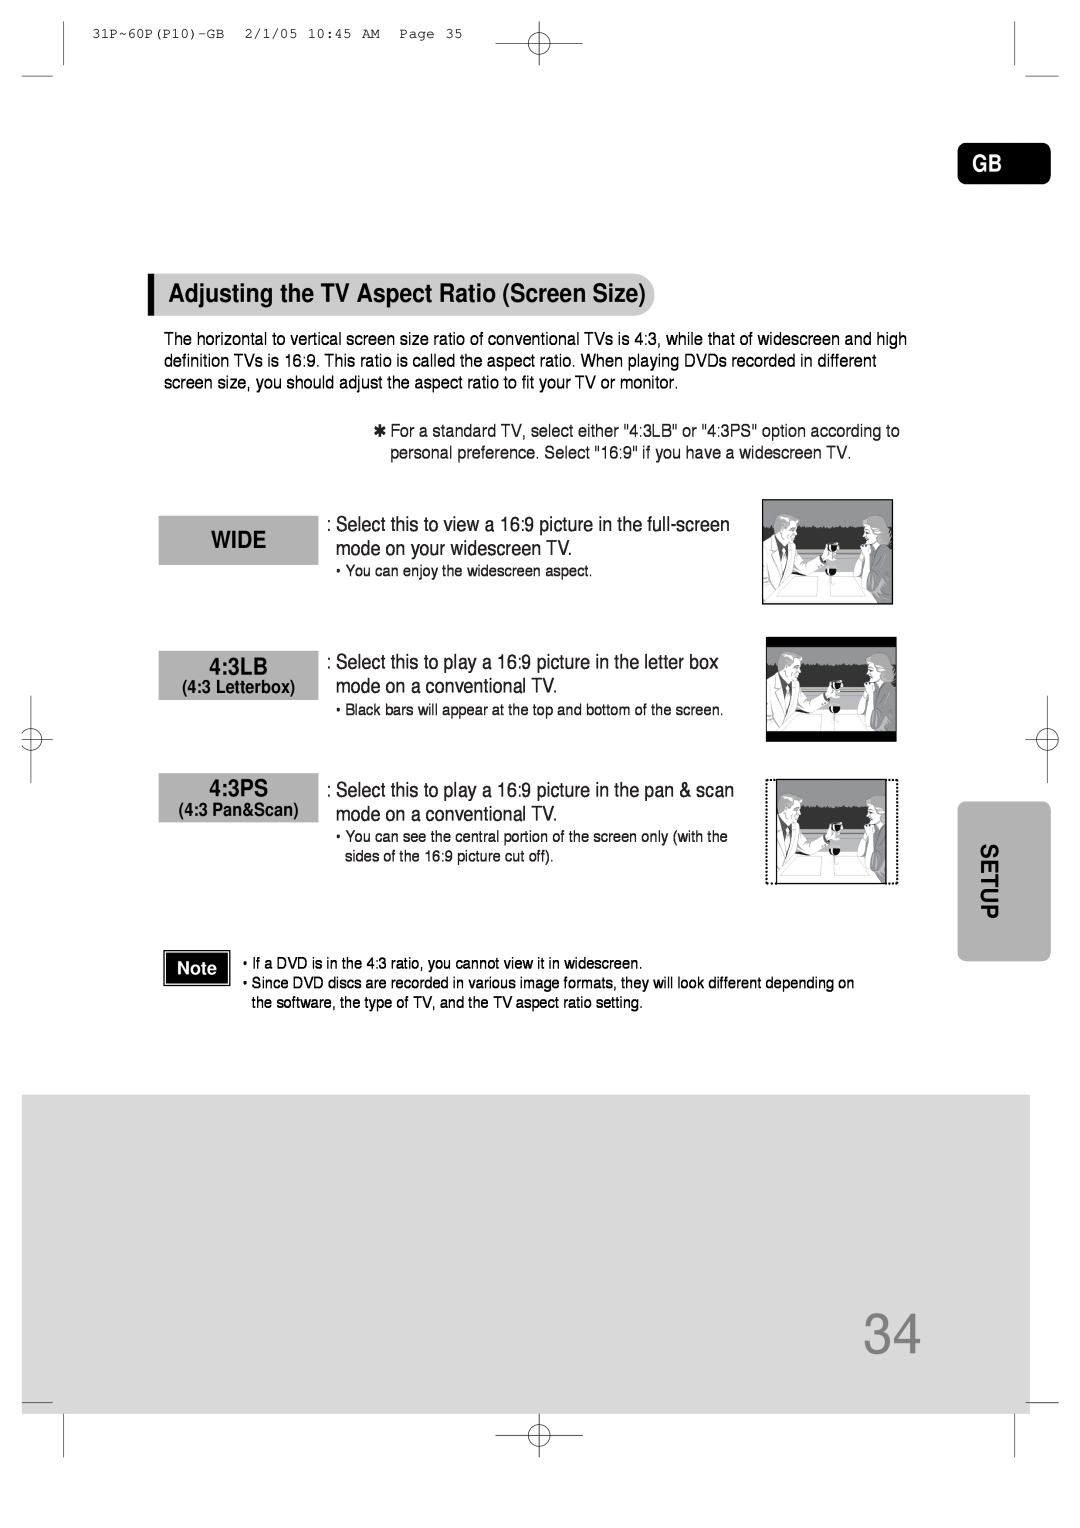 Samsung P10 instruction manual Adjusting the TV Aspect Ratio Screen Size, WIDE 4:3LB, 4 3PS 